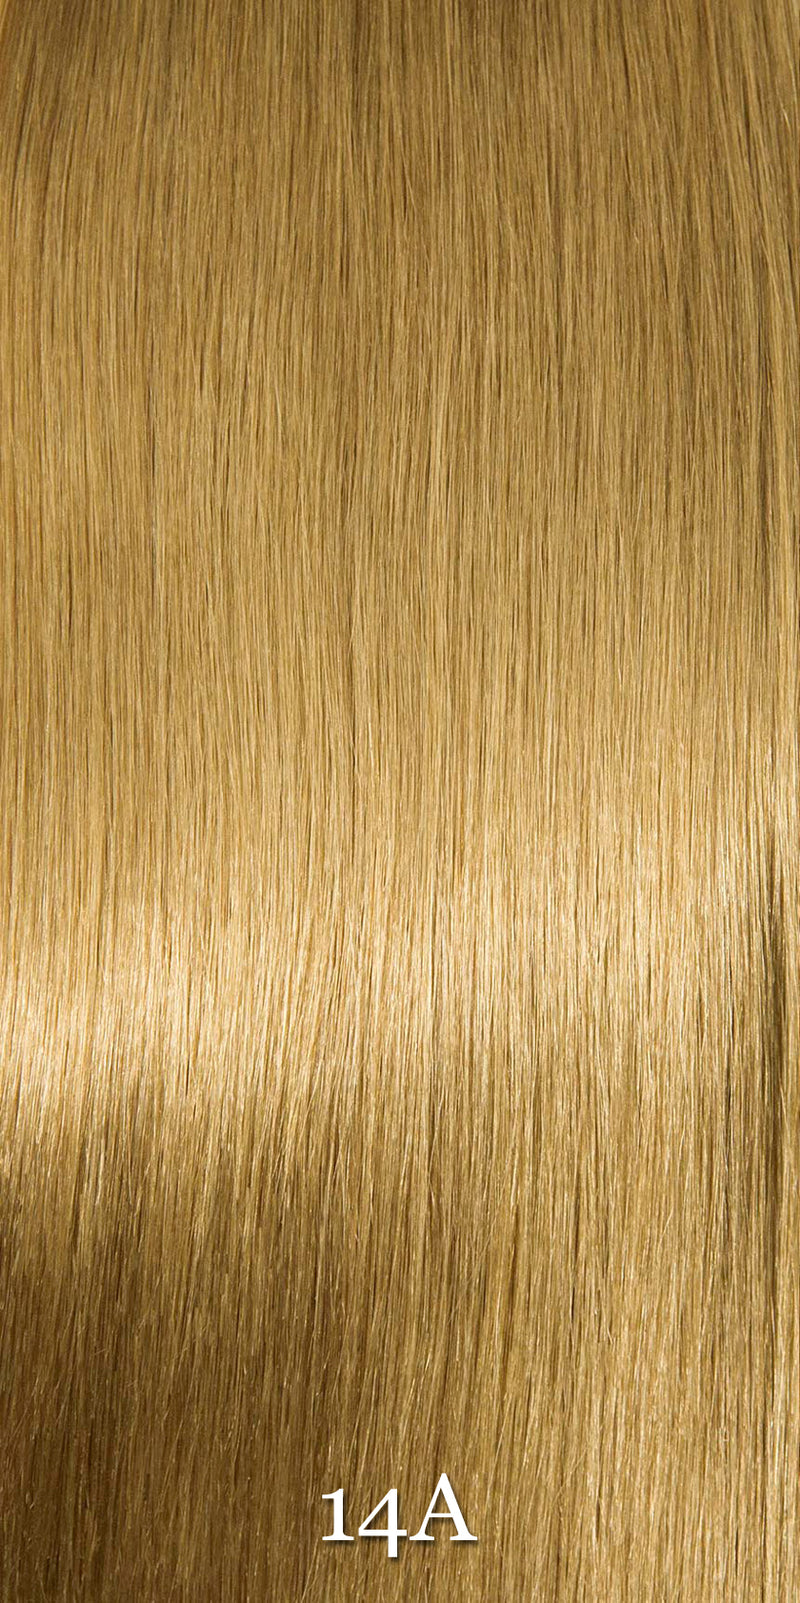 Bohyme Luxe Machine-tied Silky Straight 22"